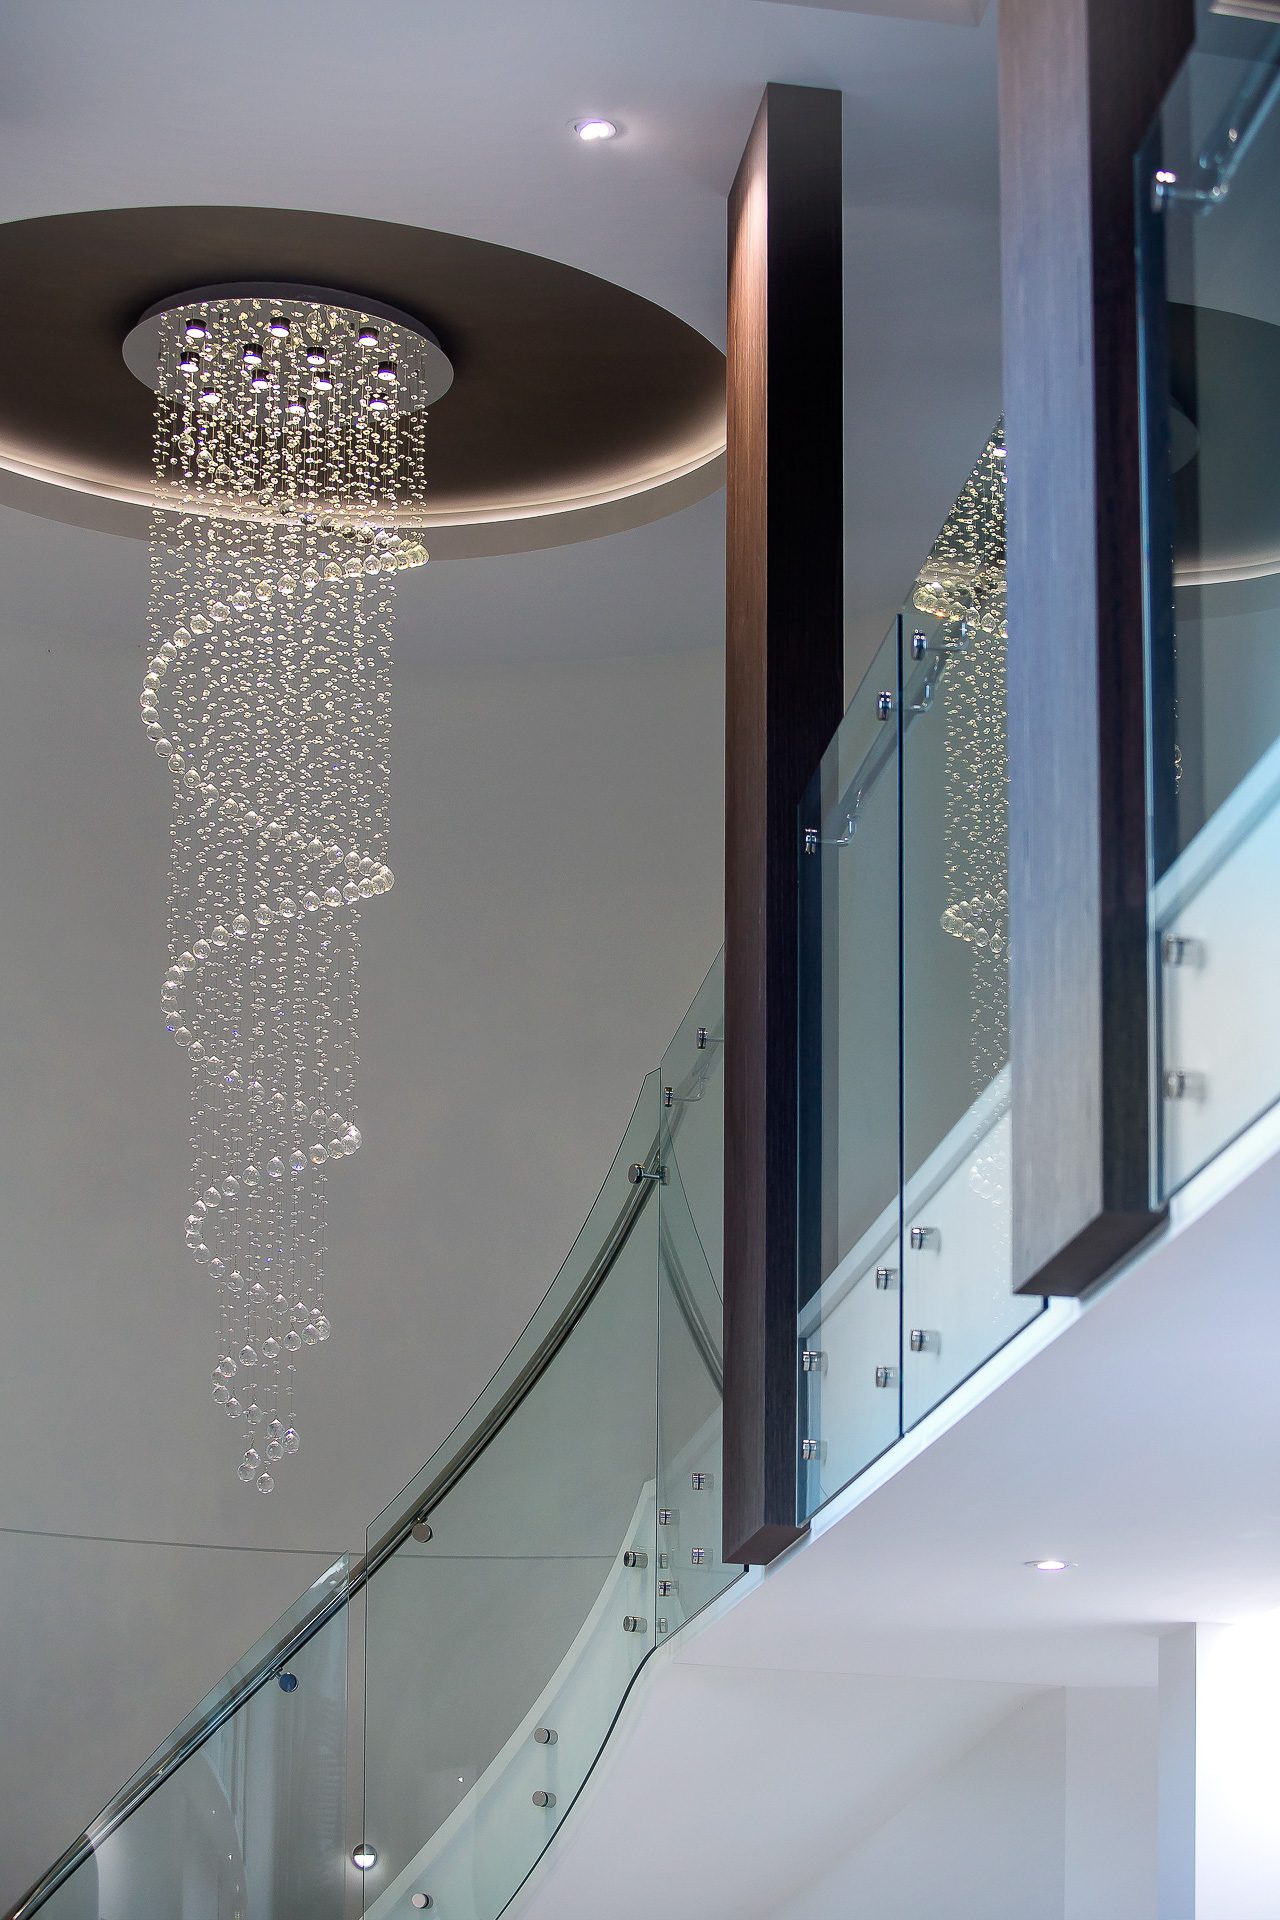 Luxury home, spiral staircase, stairs, chandelier, spiral lights, curved glass, stunning entry, minka joinery